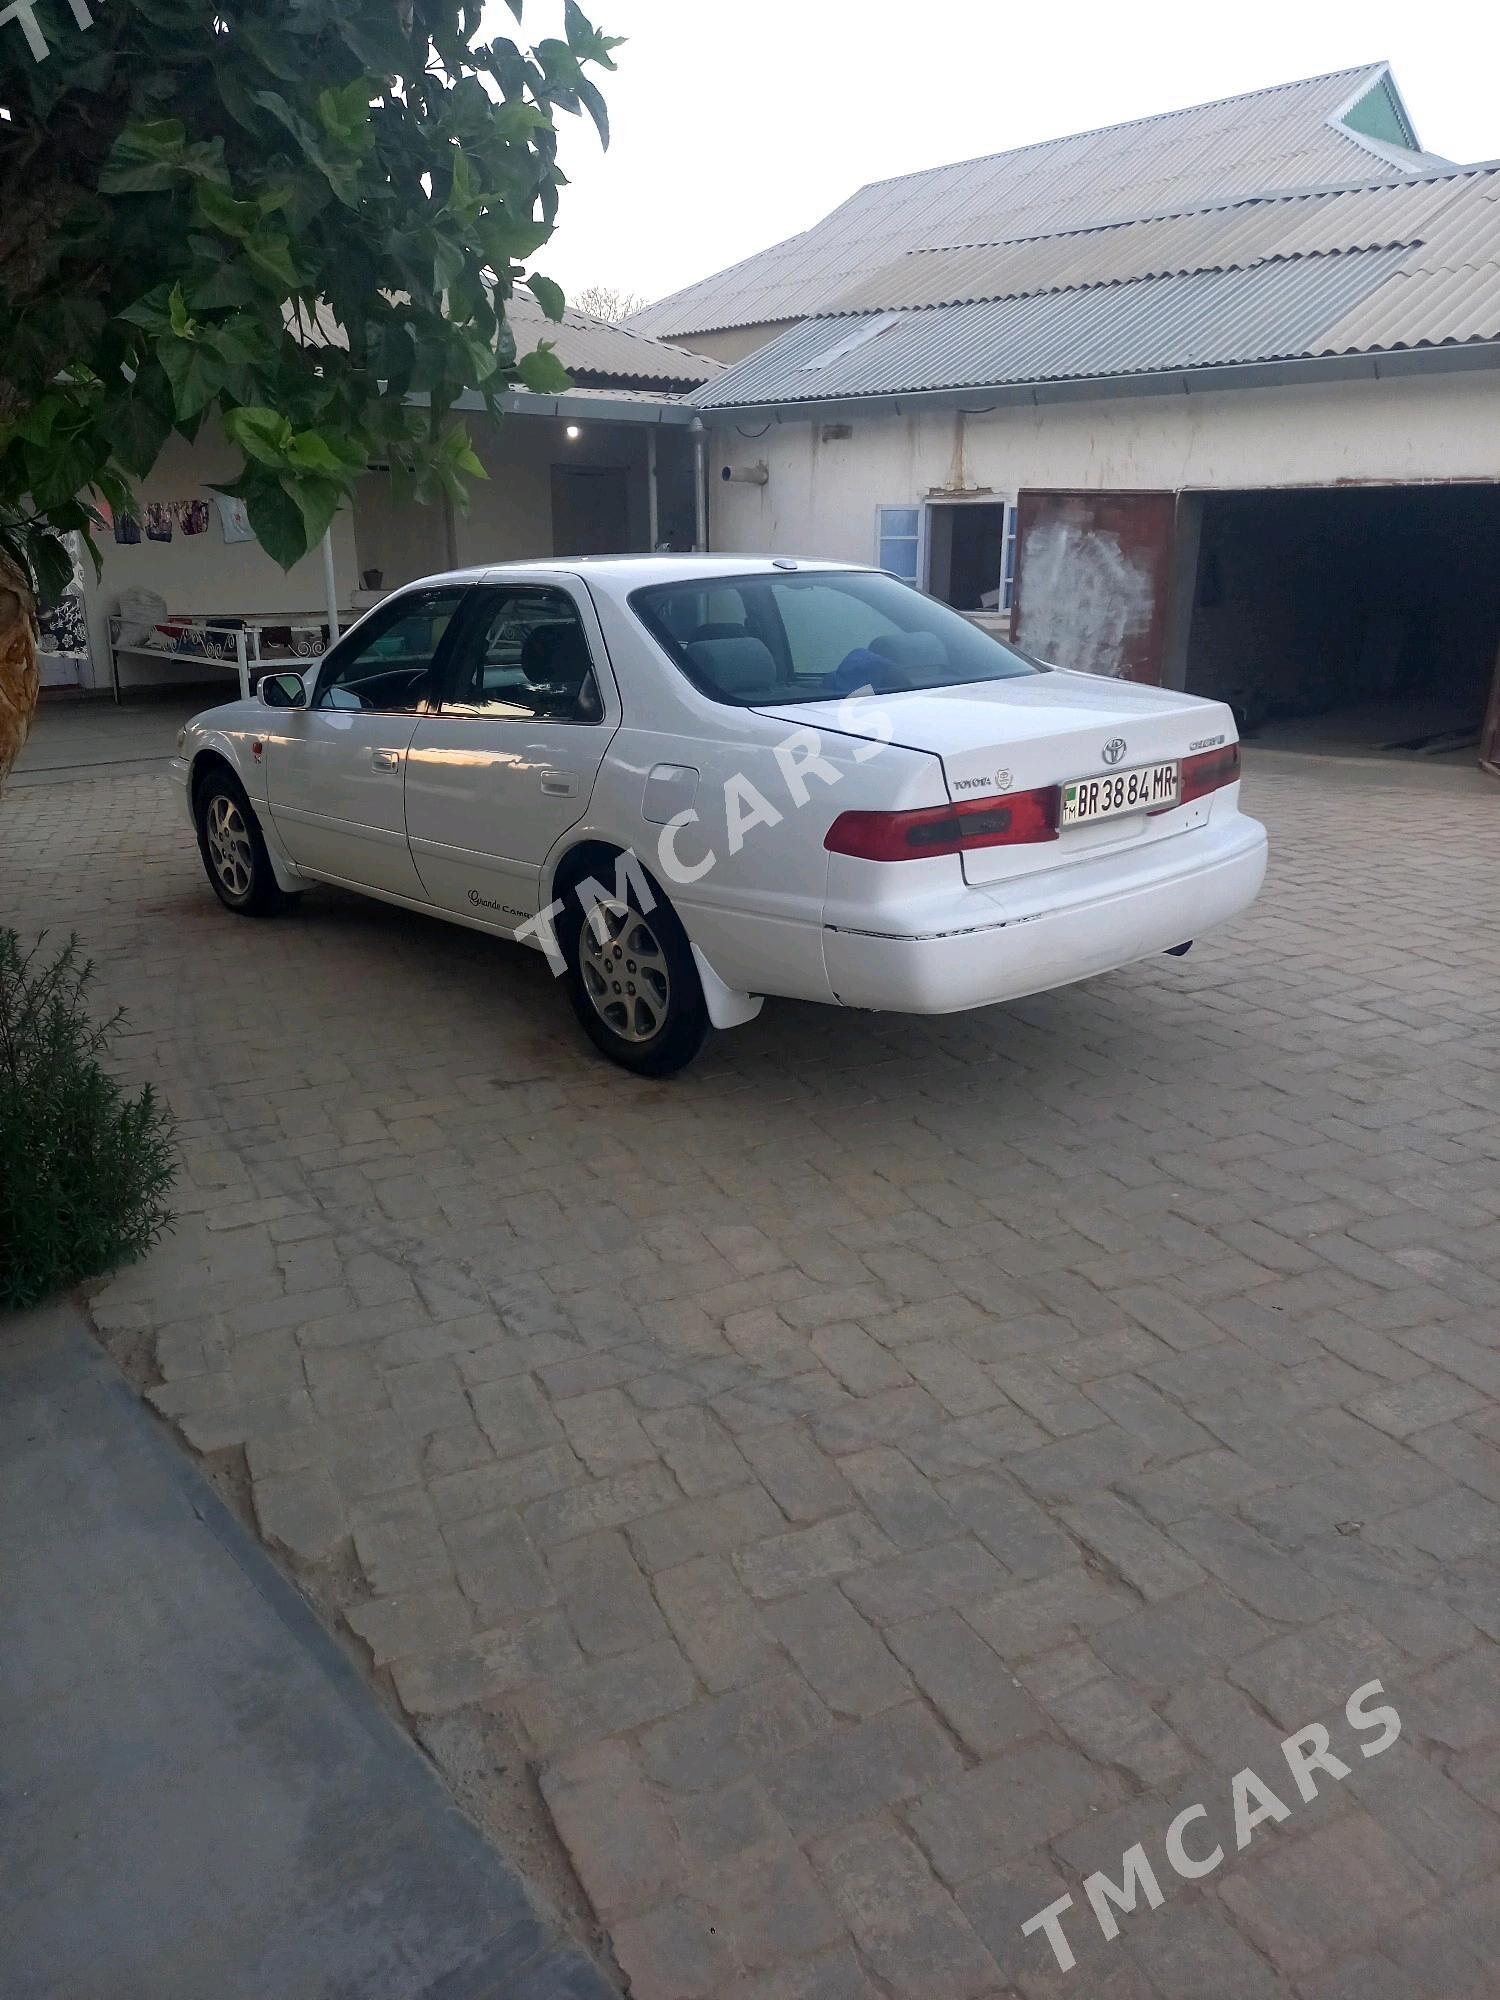 Toyota Camry 2000 - 80 000 TMT - Tagtabazar - img 3